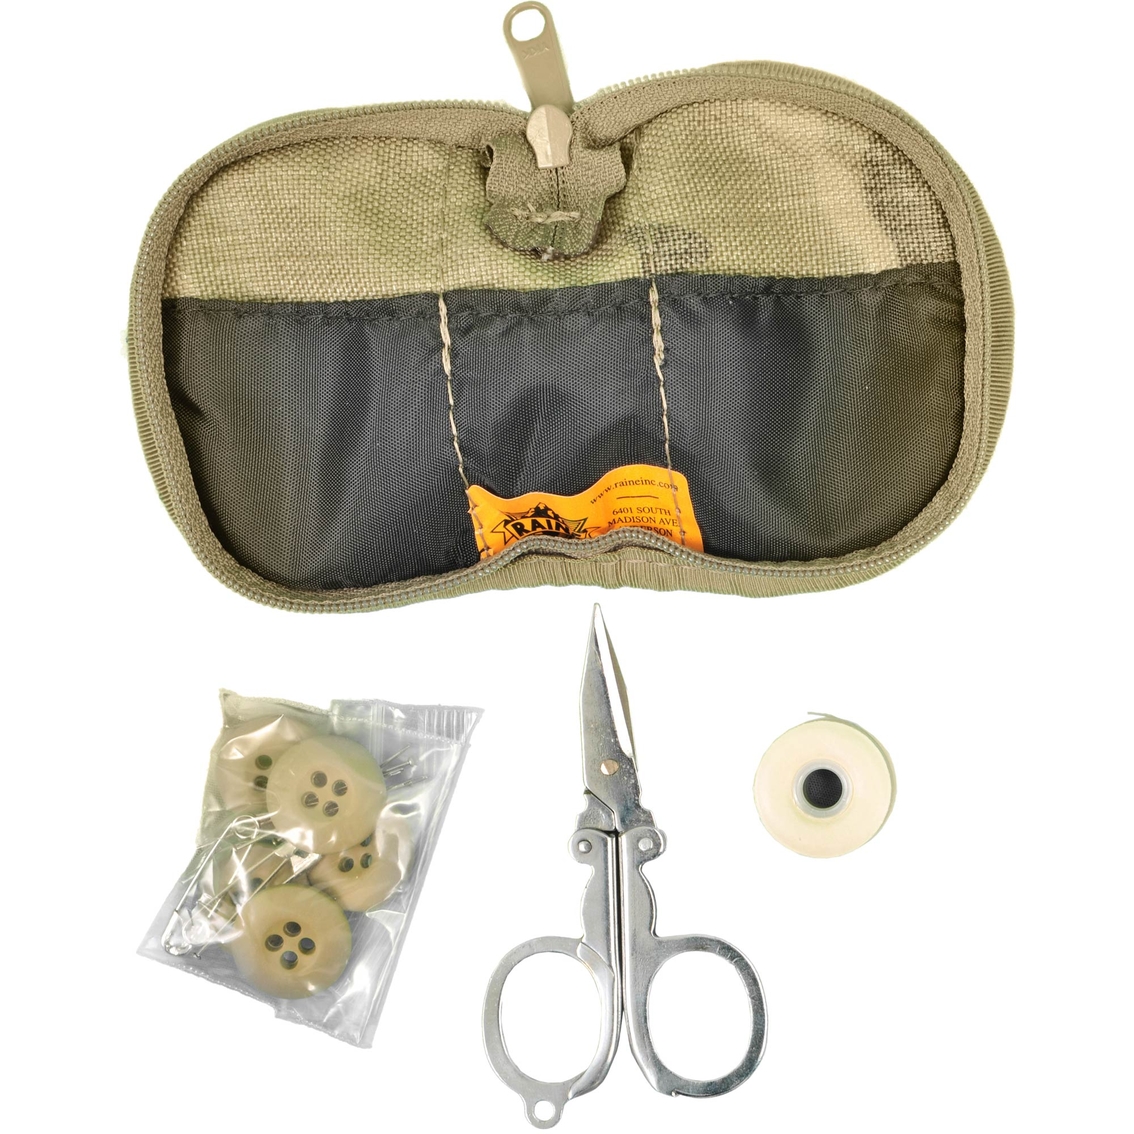 Raine Sewing Kit, Tactical Accessories, Sports & Outdoors